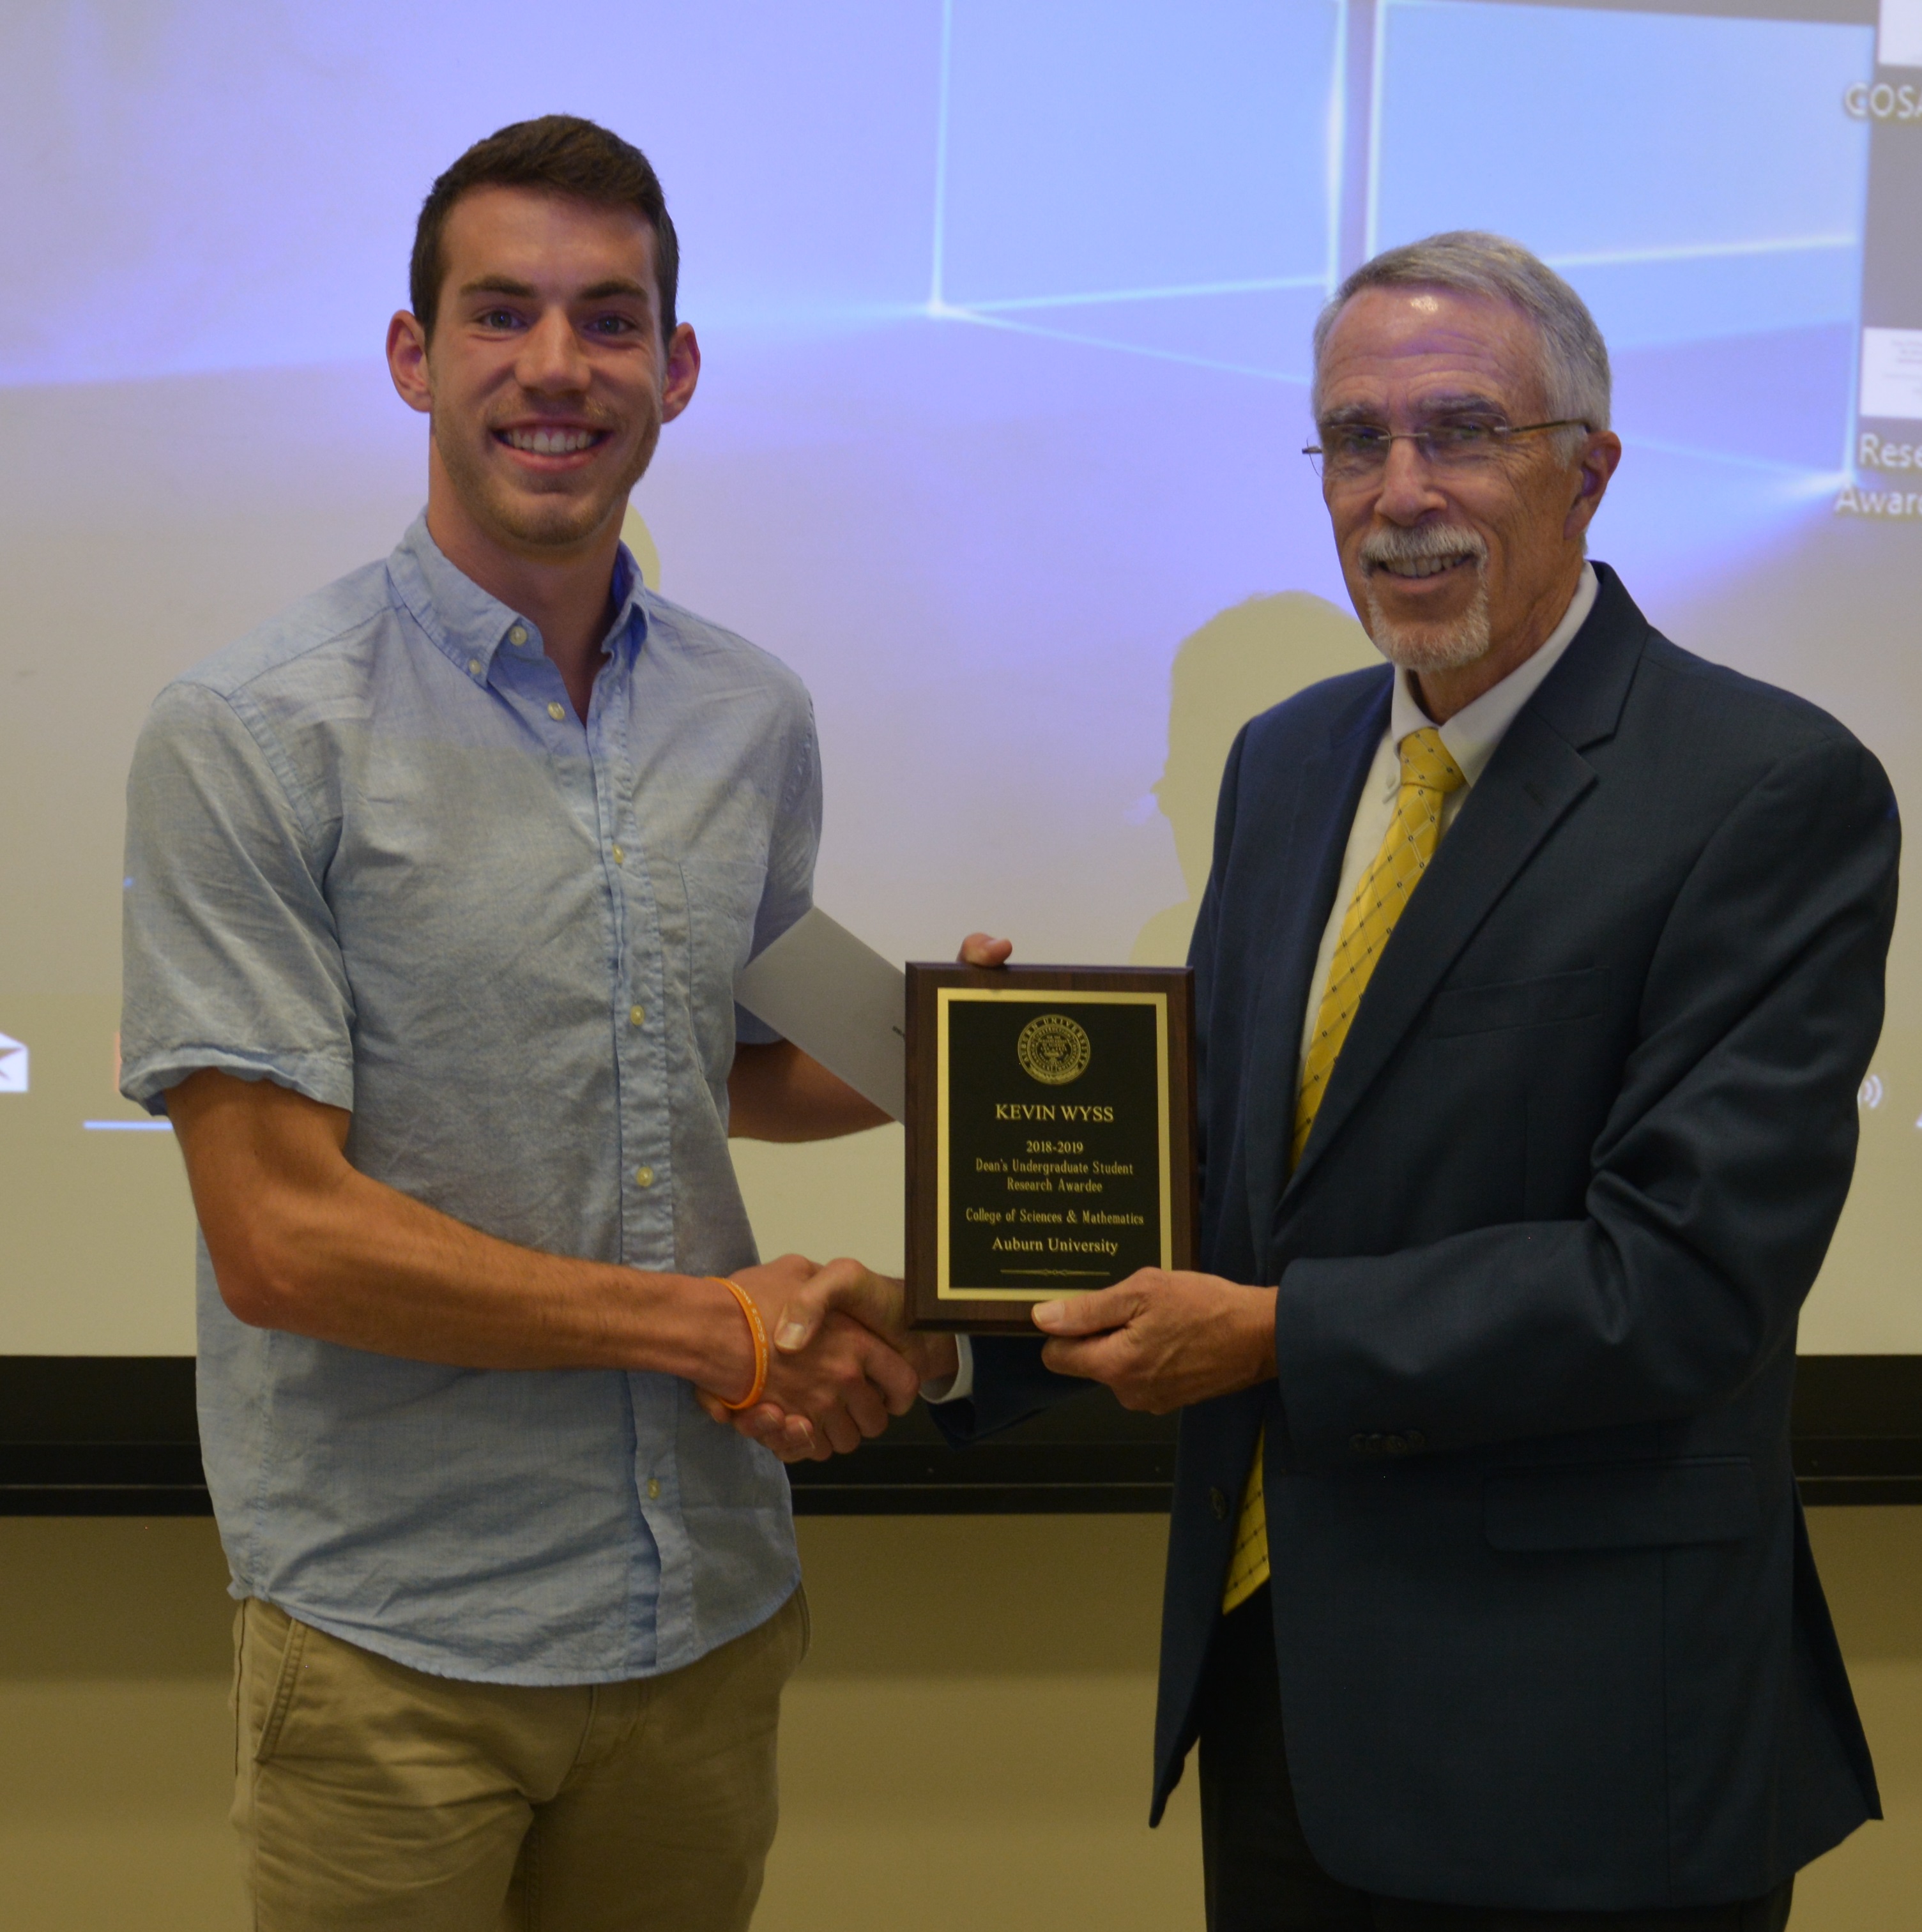 Kevin Wyss receiving the Undergraduate Student Award from Dean Giordano.